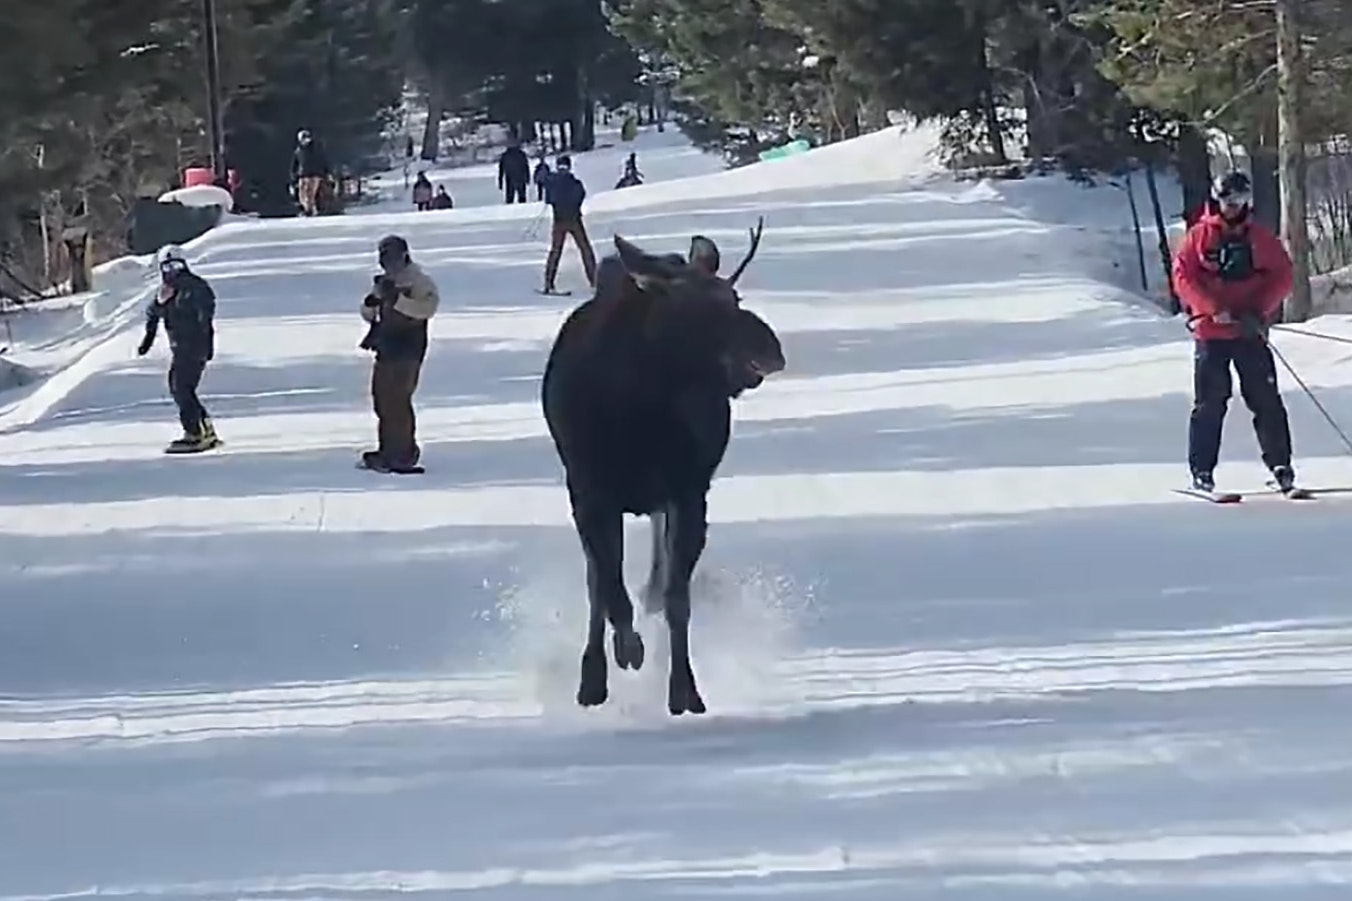 A moose ran down a ski slope at Jackson Hole Mountain Resort with a host of skiers this past weekend.